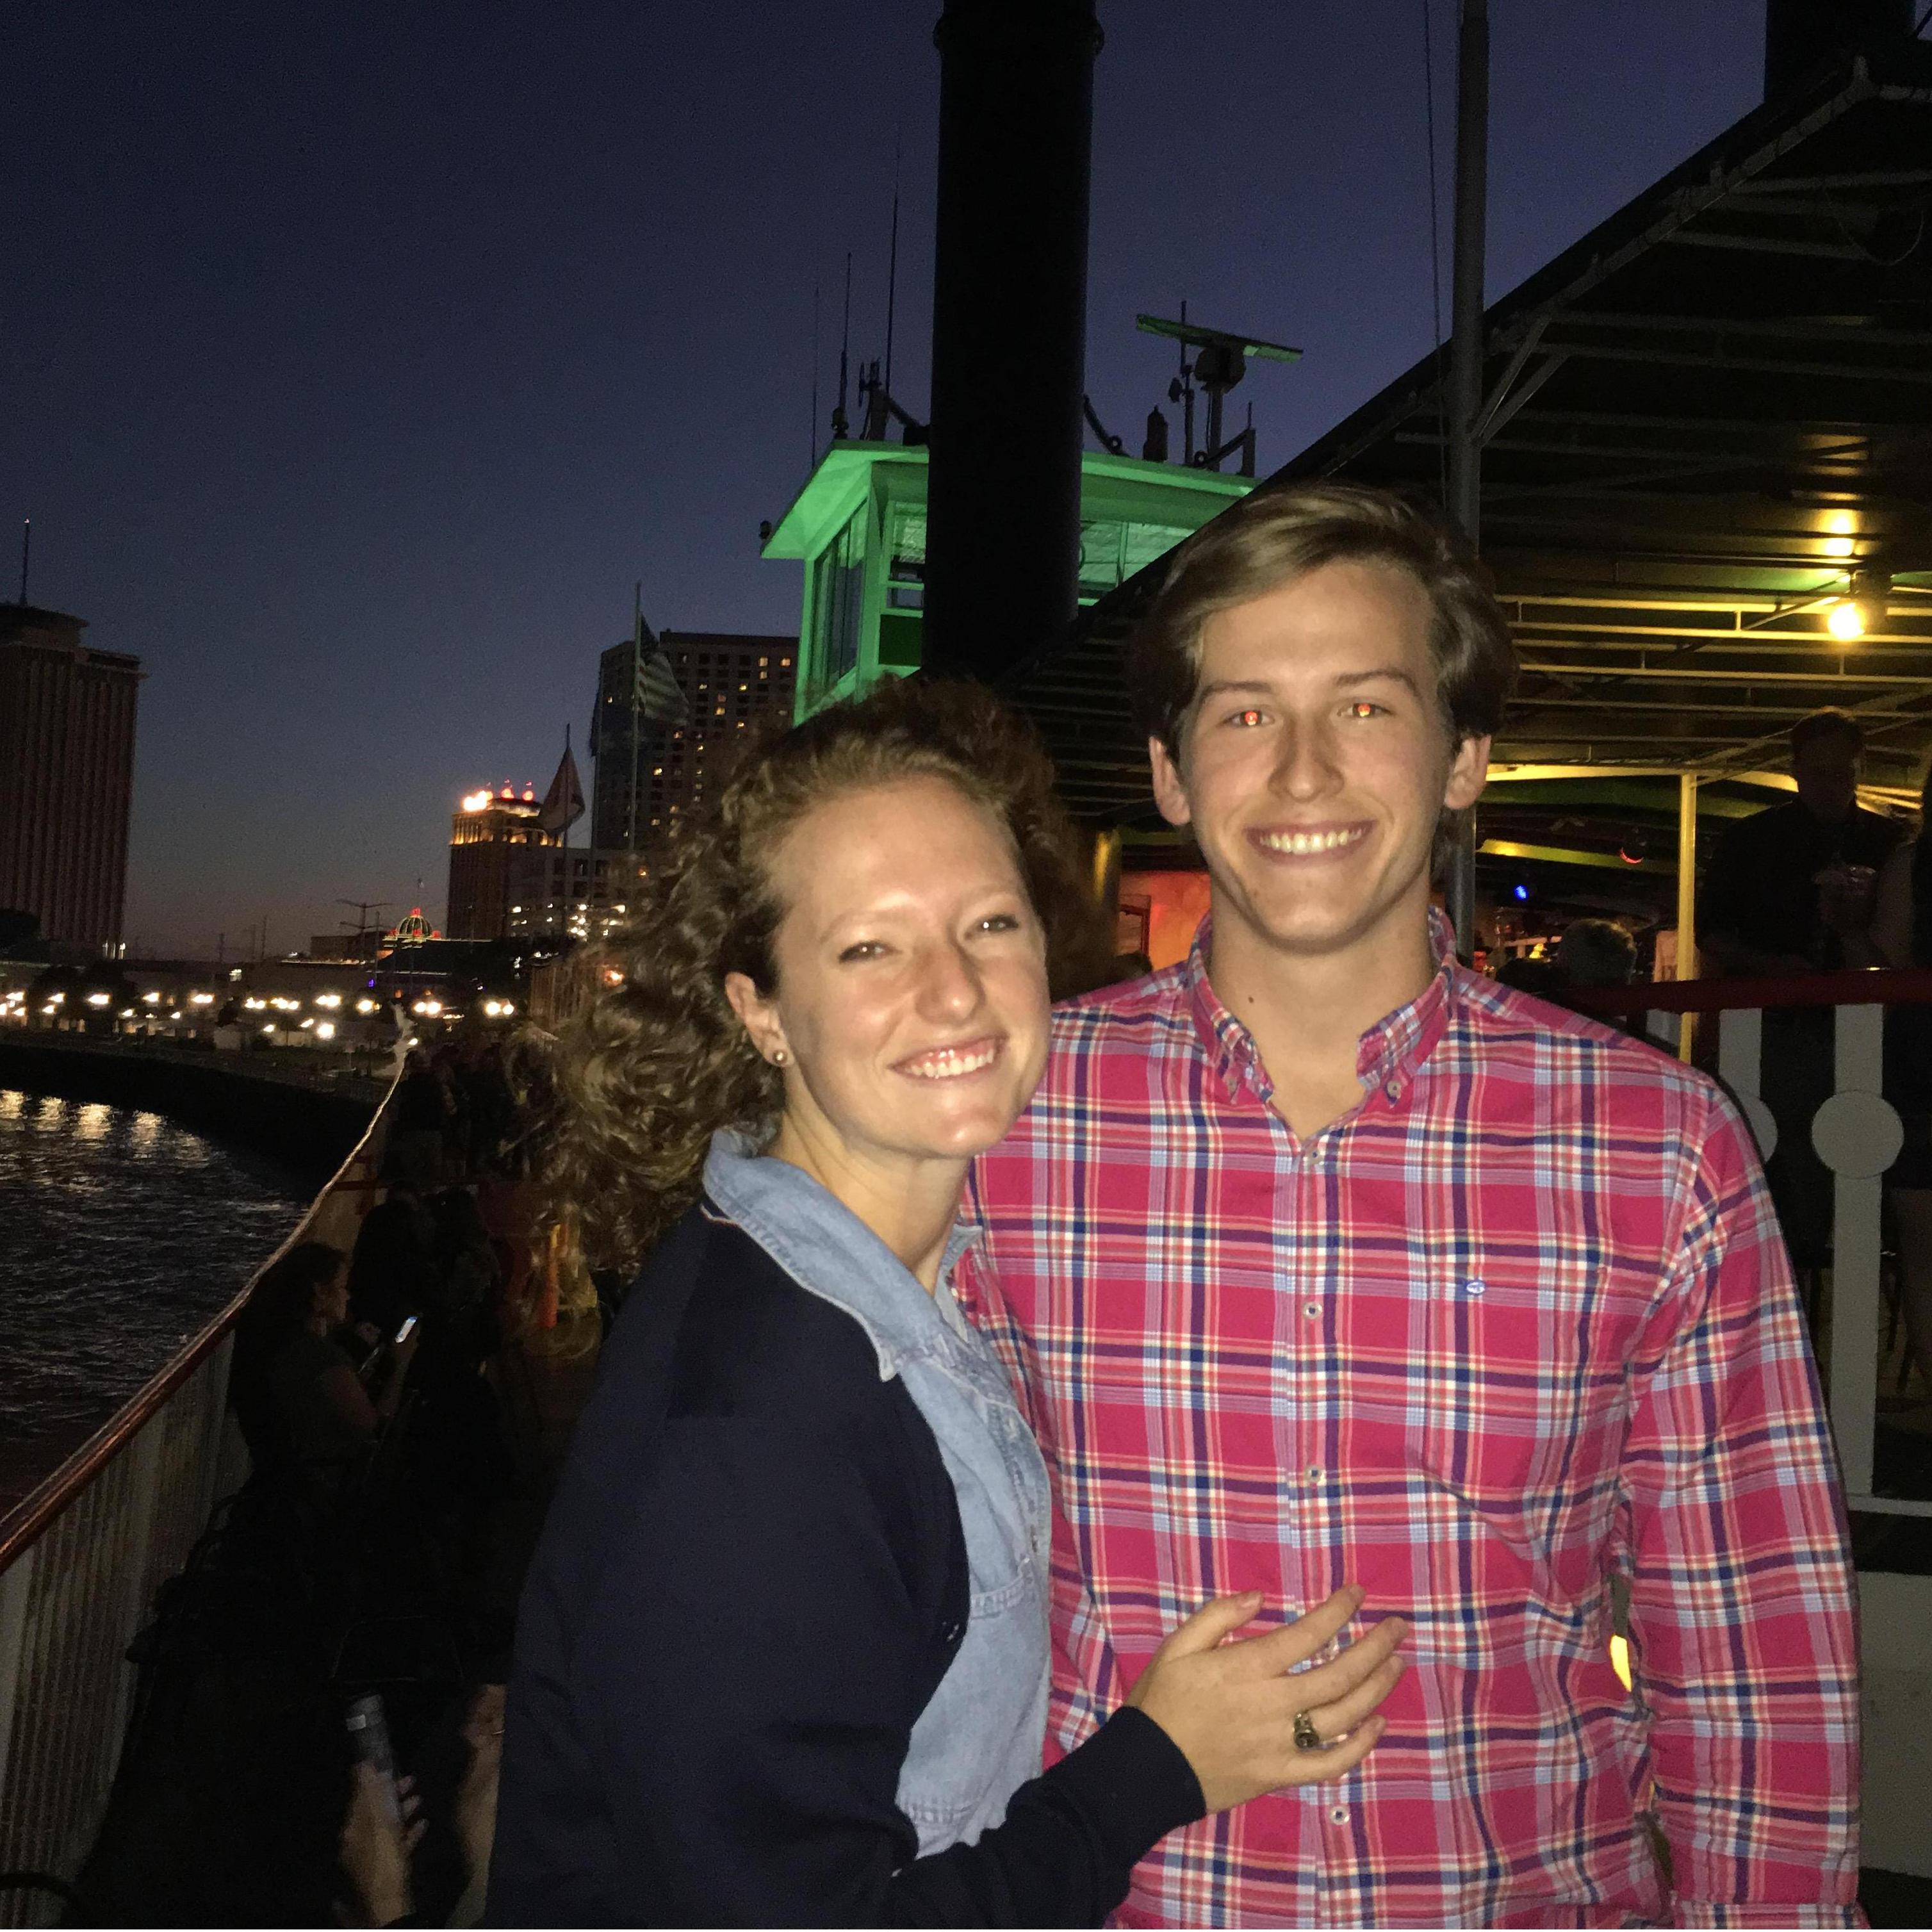 Caroline took Cam on the Steamboat Natchez in New Orleans for his birthday